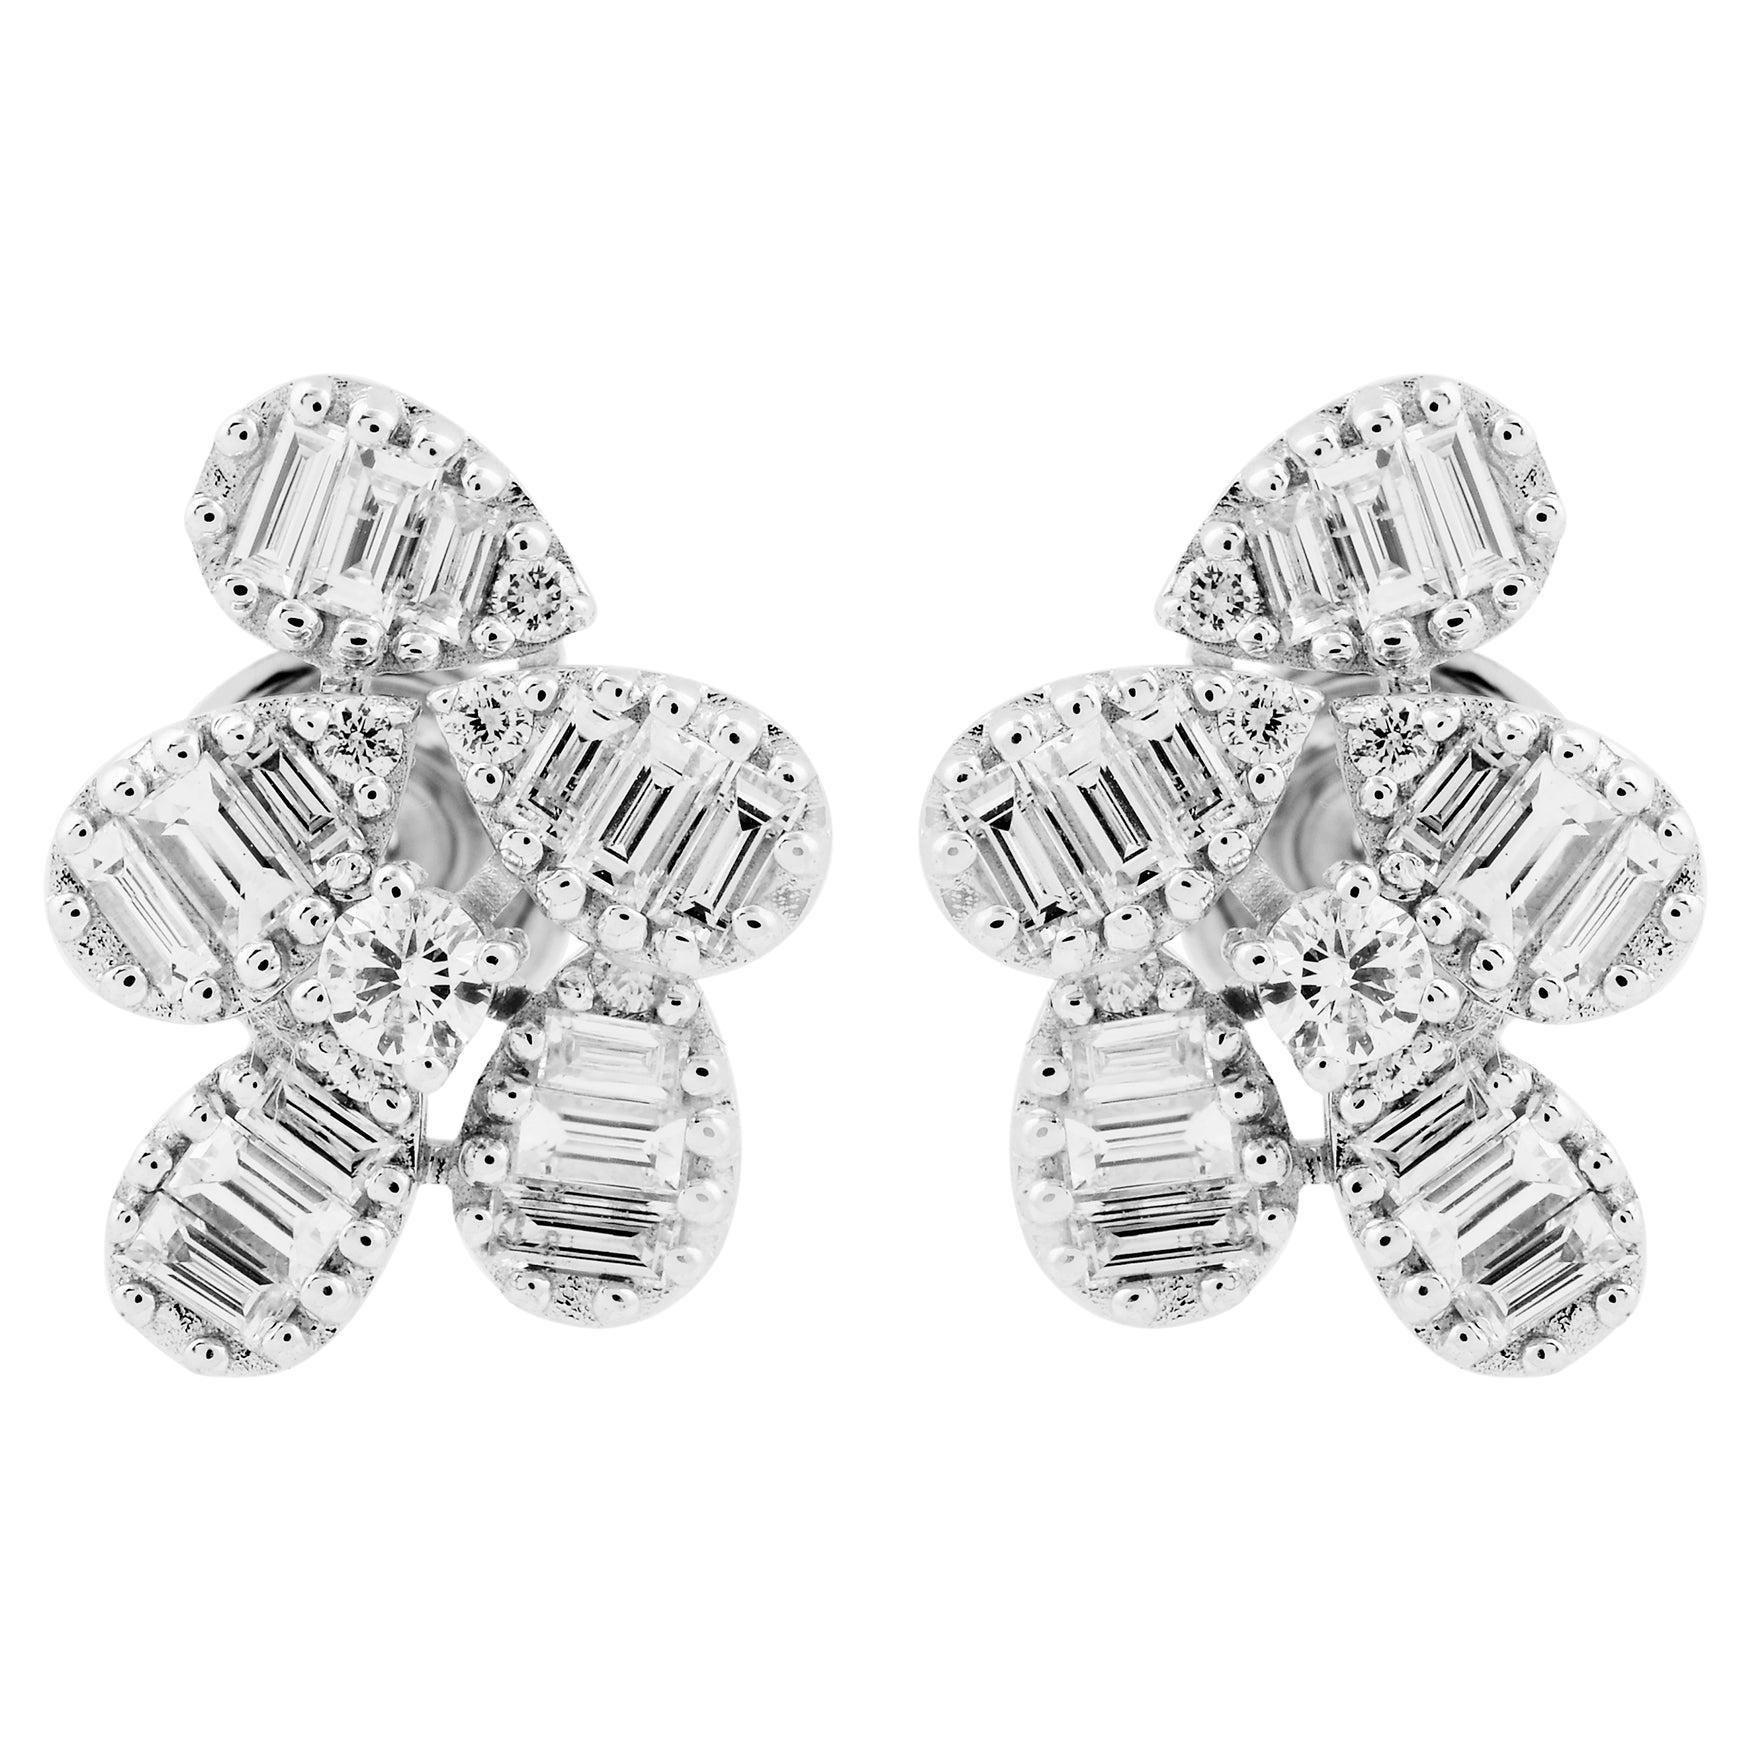 Clarity SI Color HI Baguette Diamond Stud Ears Solid 18k White Gold Jewelry